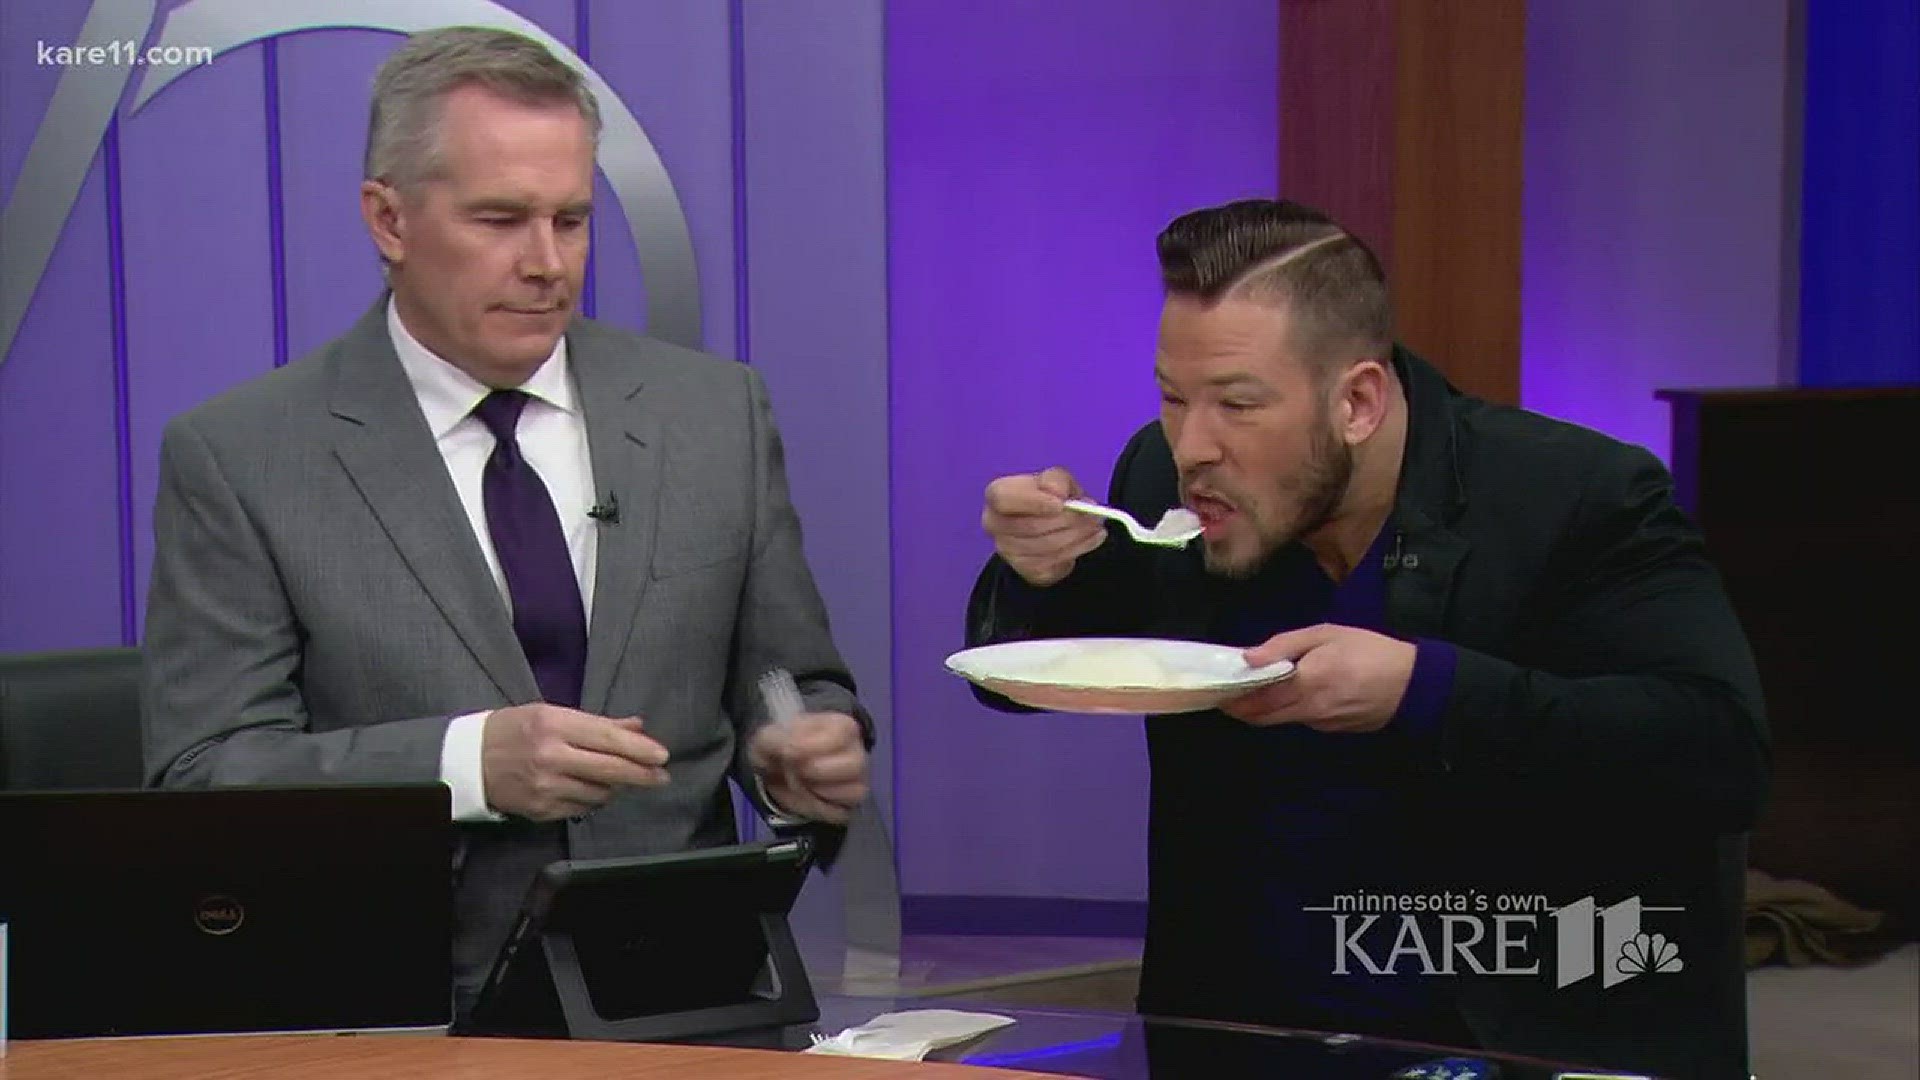 The KARE 11 Sunrise crew gave lutefisk a try live on-air...and it didn't go so well.